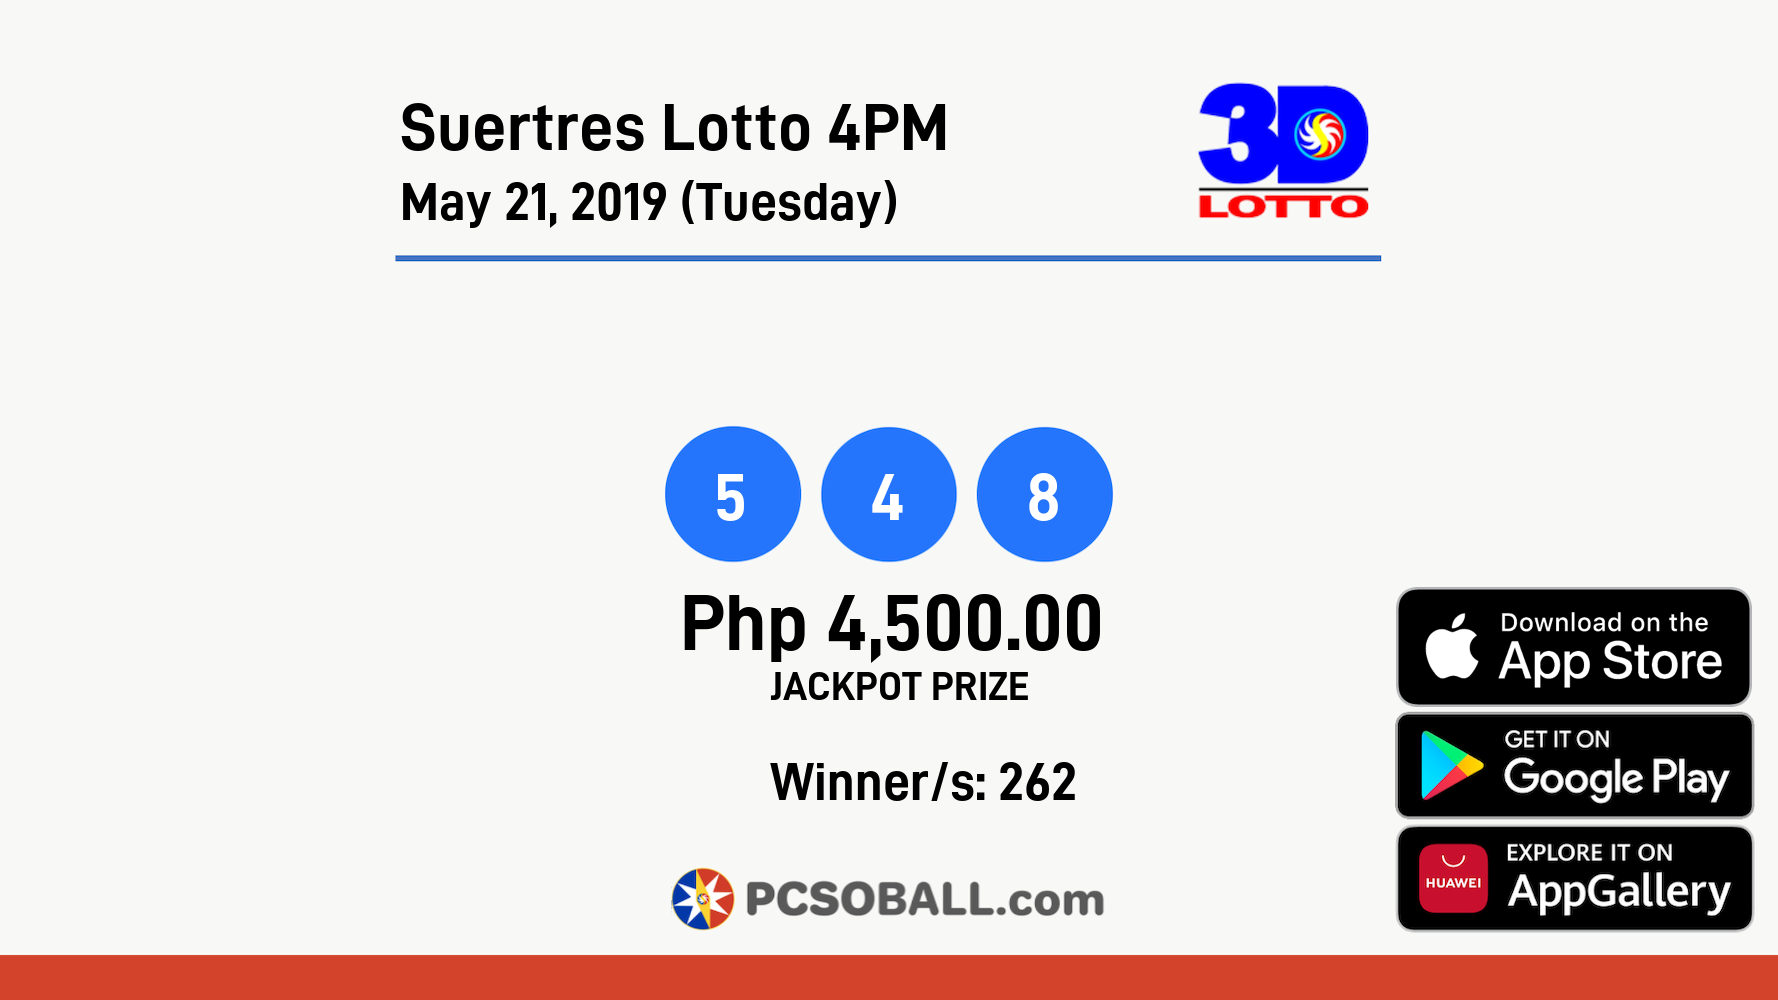 Suertres Lotto 4PM May 21, 2019 (Tuesday) Result